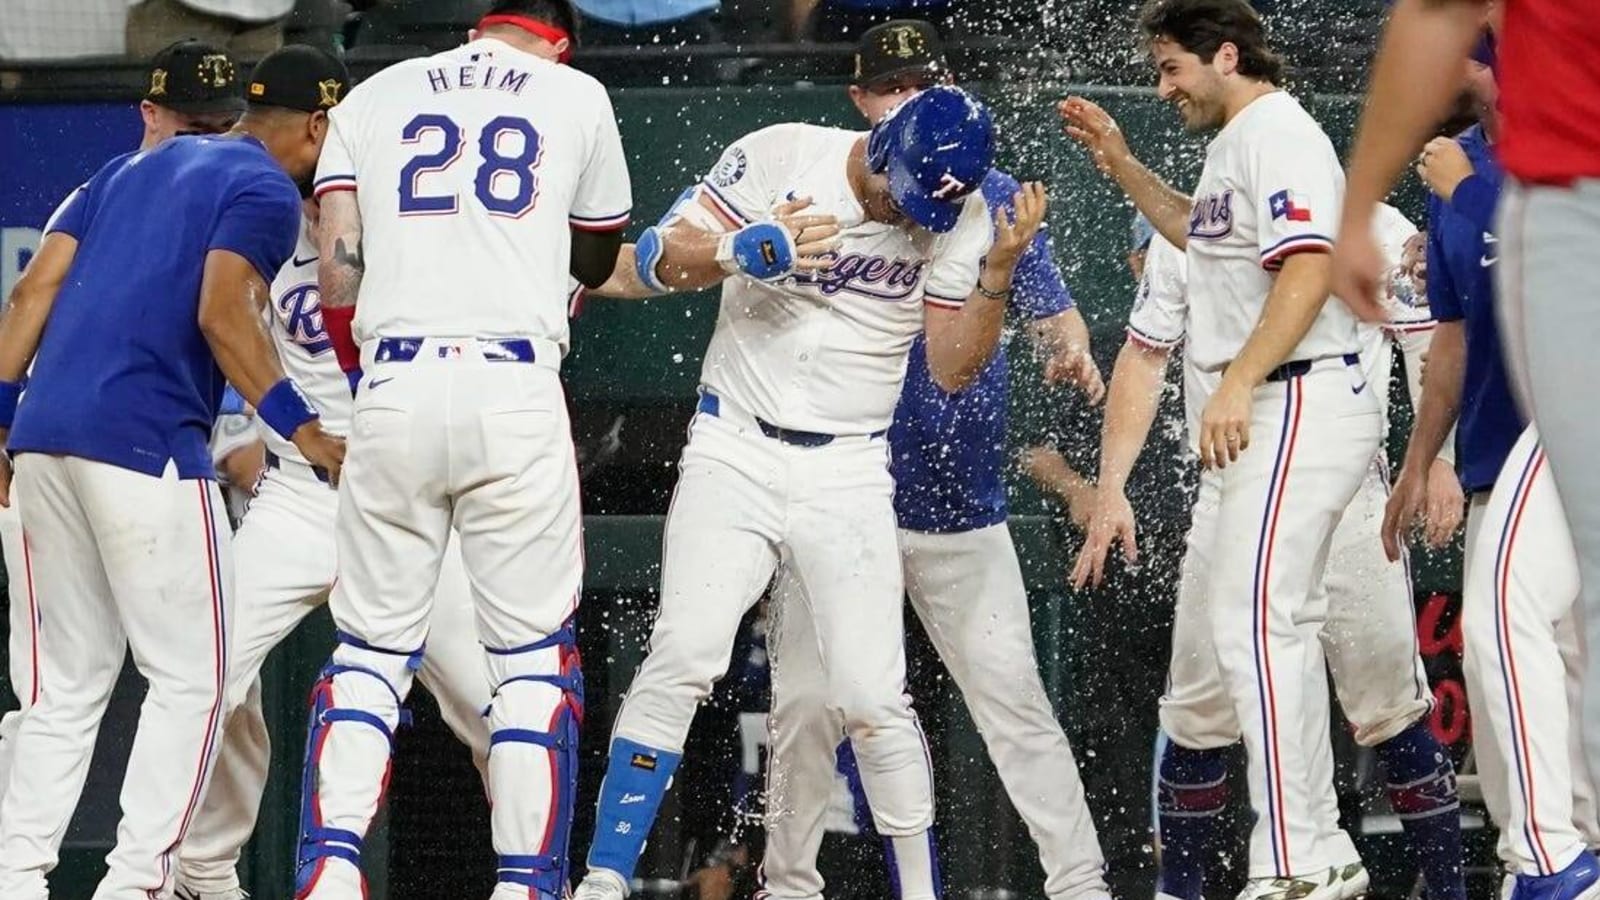 After thrilling win, Rangers aim to take series from Angels